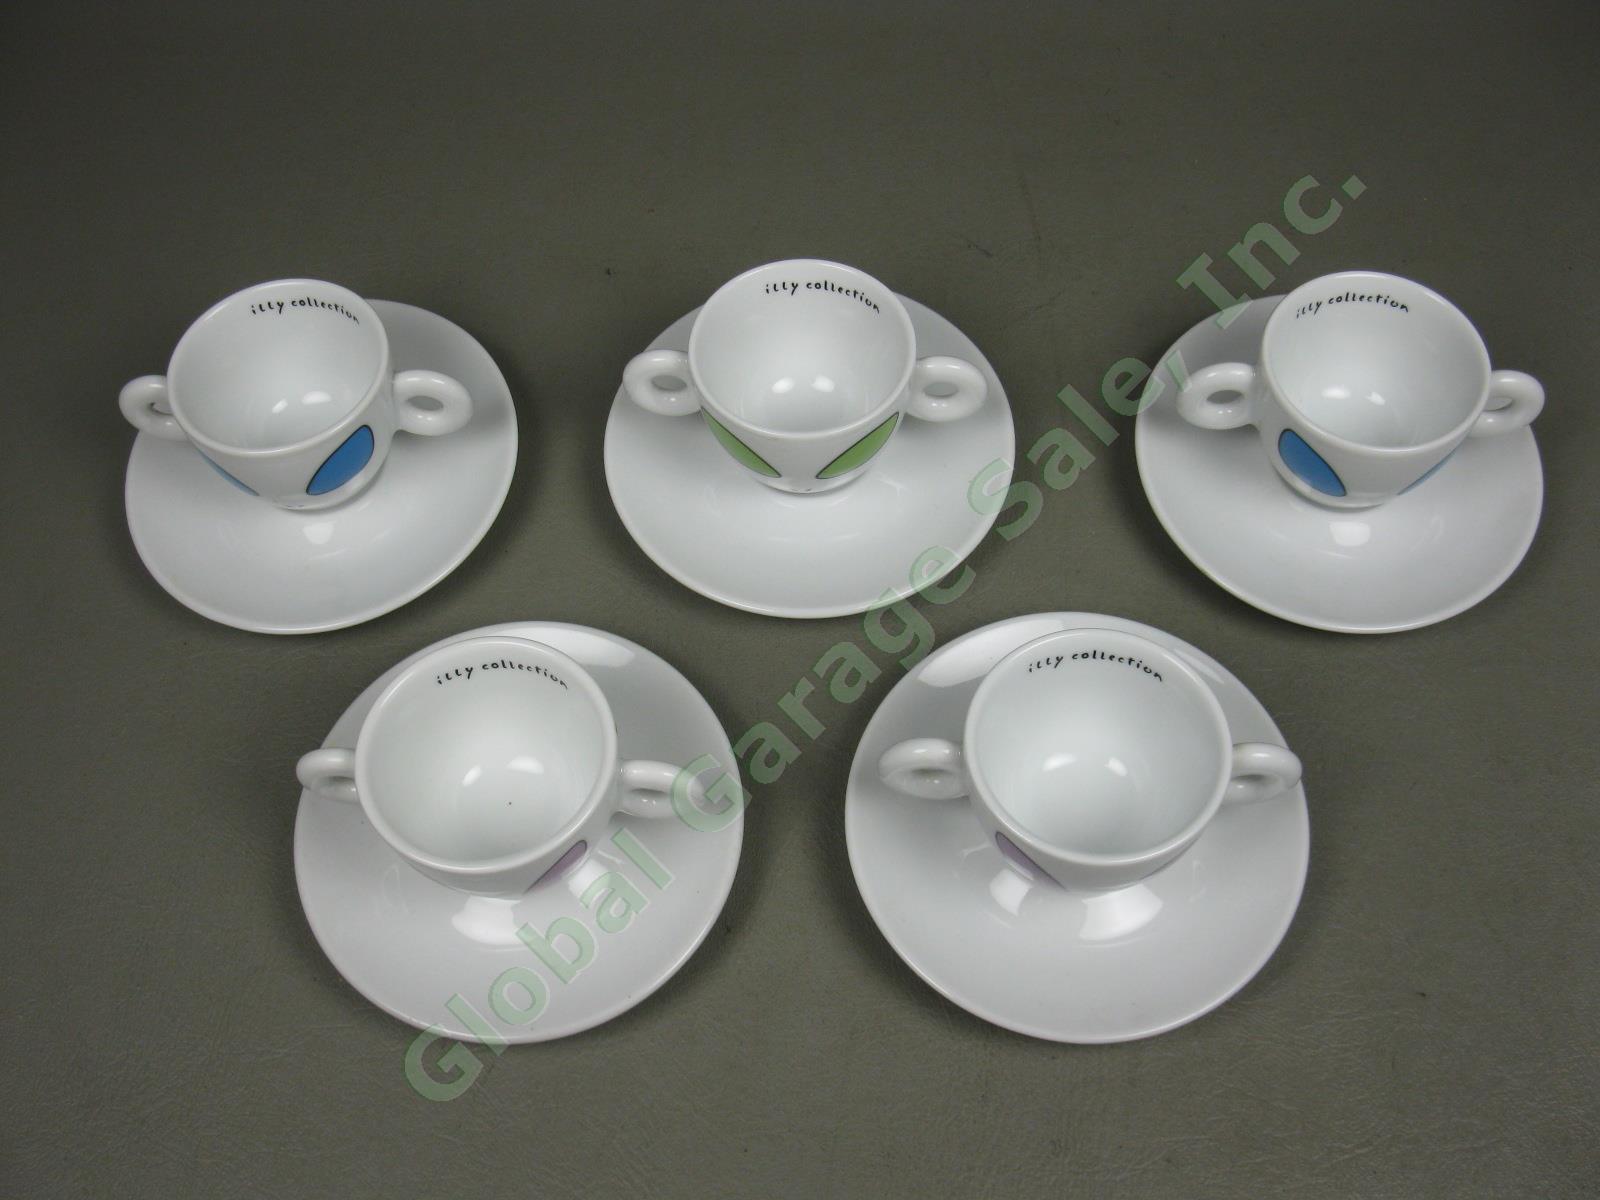 5 Illy Collection David Byrne Alien Espresso Coffee Cups + Saucers Set Lot 2001 1